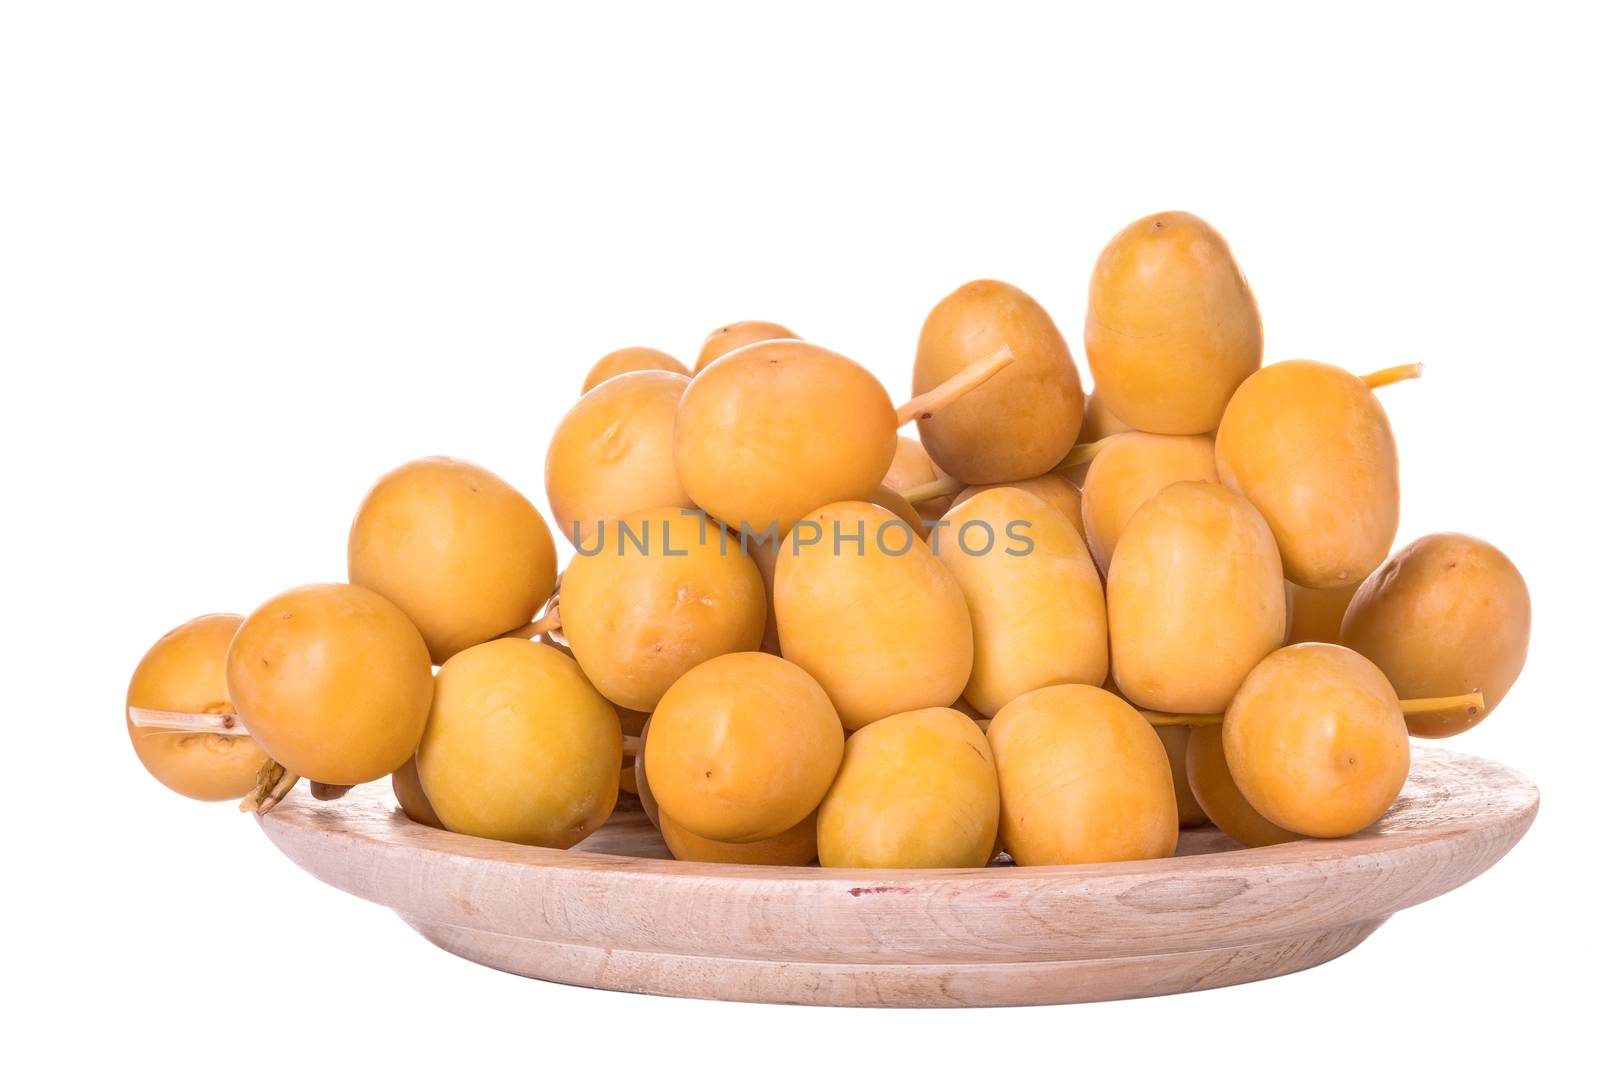 Dates or date palm in wood bowl isolated on white background.